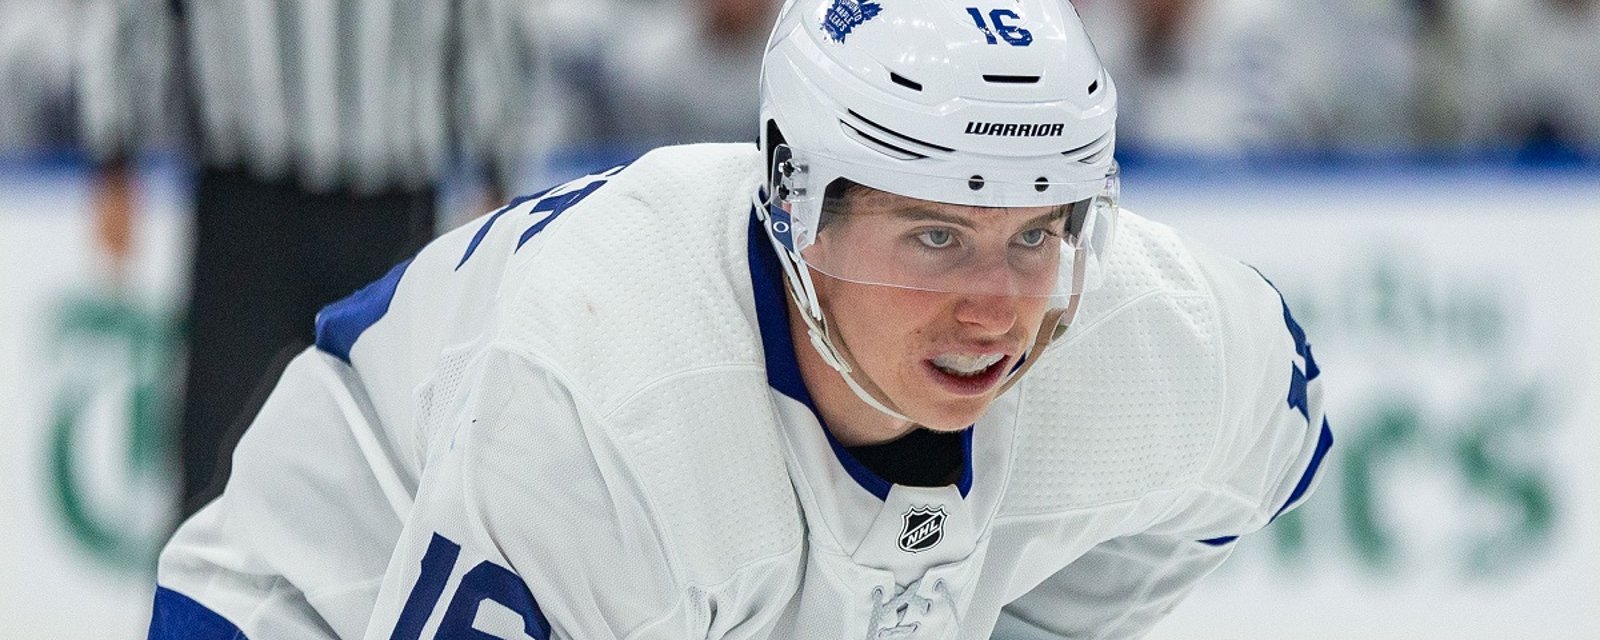 Mike Babcock drove a 19 year old Mitch Marner to tears.